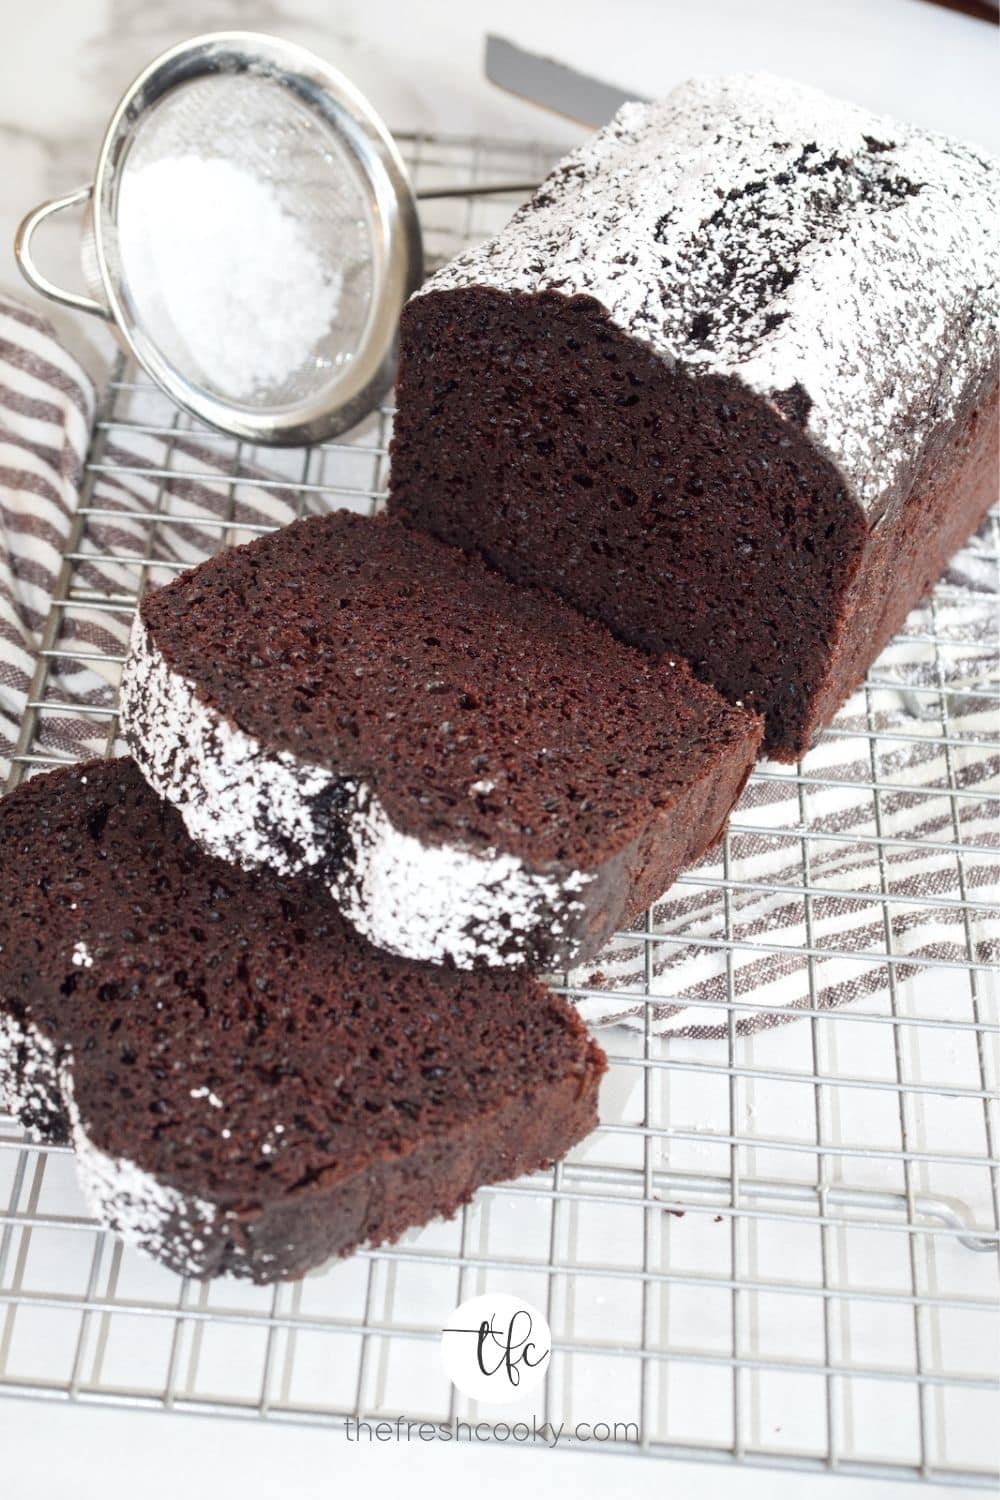 Best Easy Chocolate Loaf Cake on wire rack with powdered sugar dusting and sliced